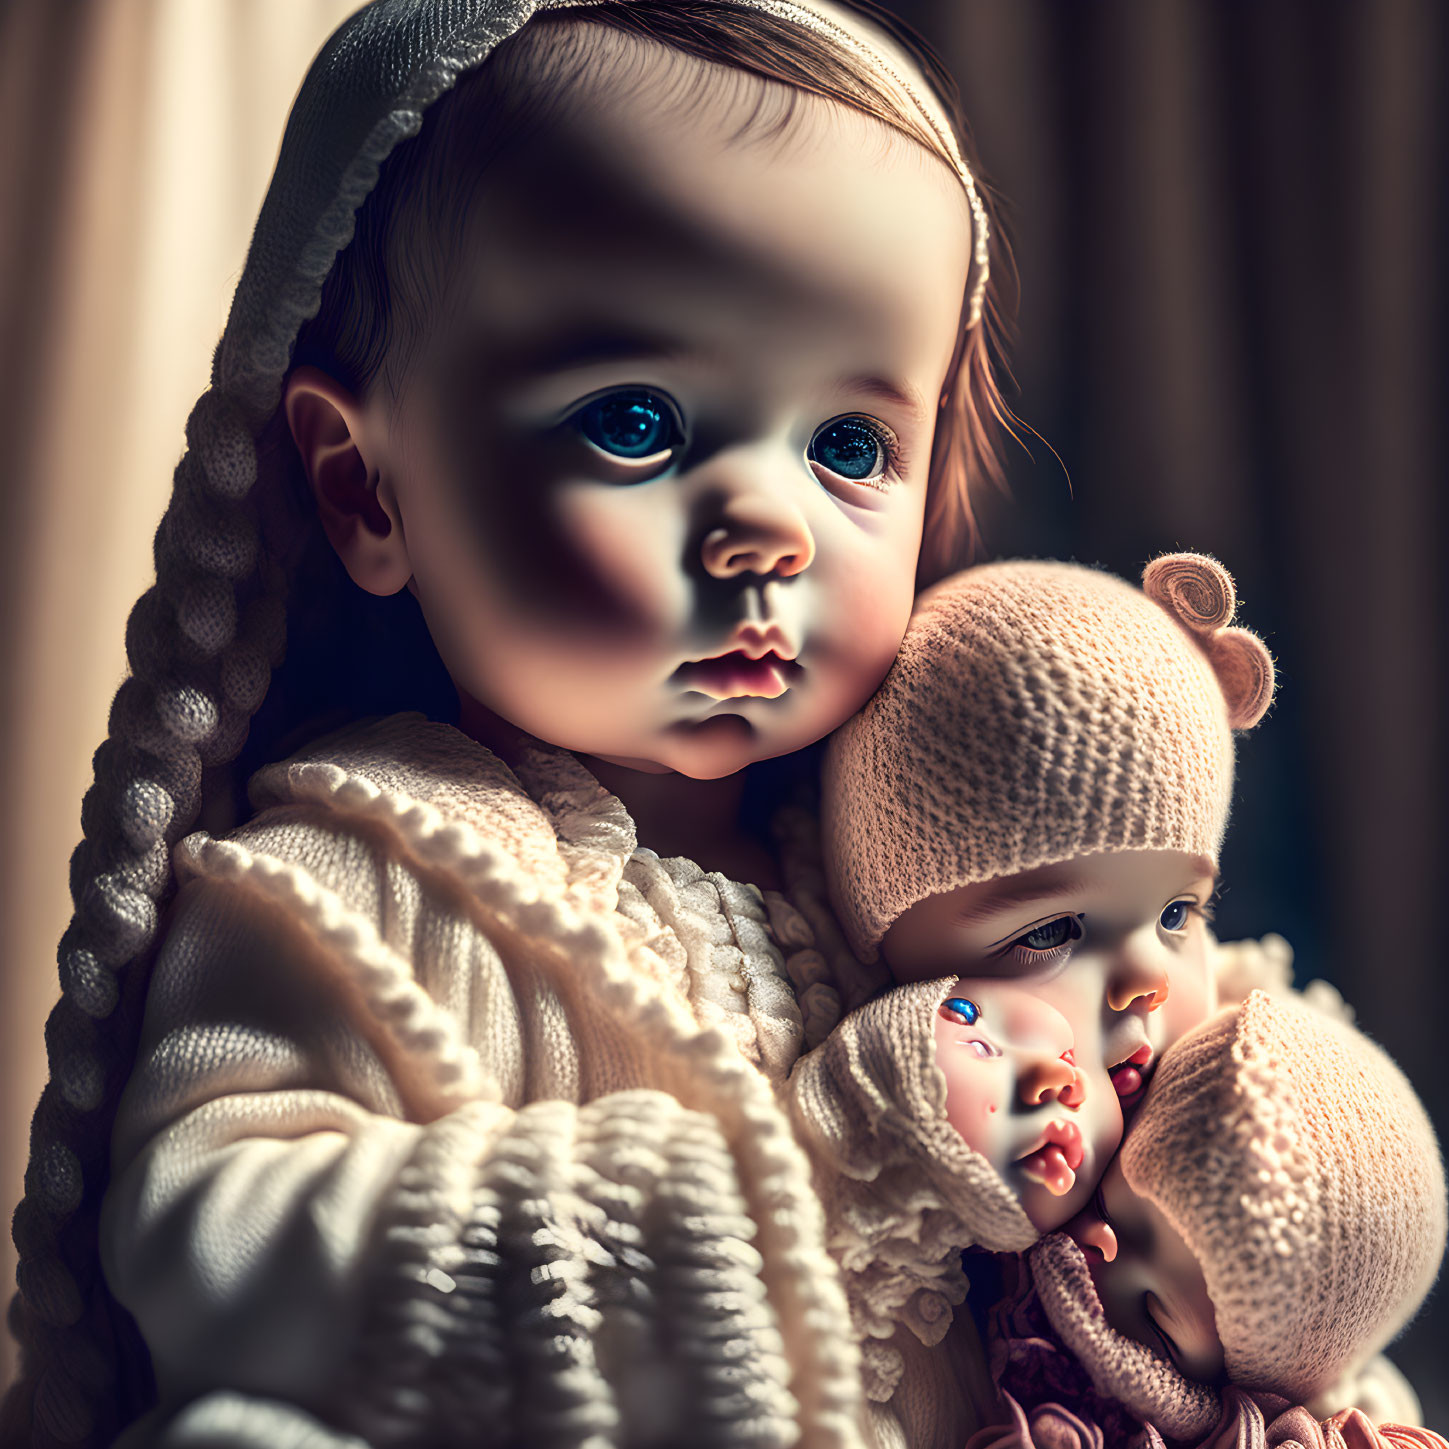 Child with braided hair holding doll in close-up portrait, soft light, dark background